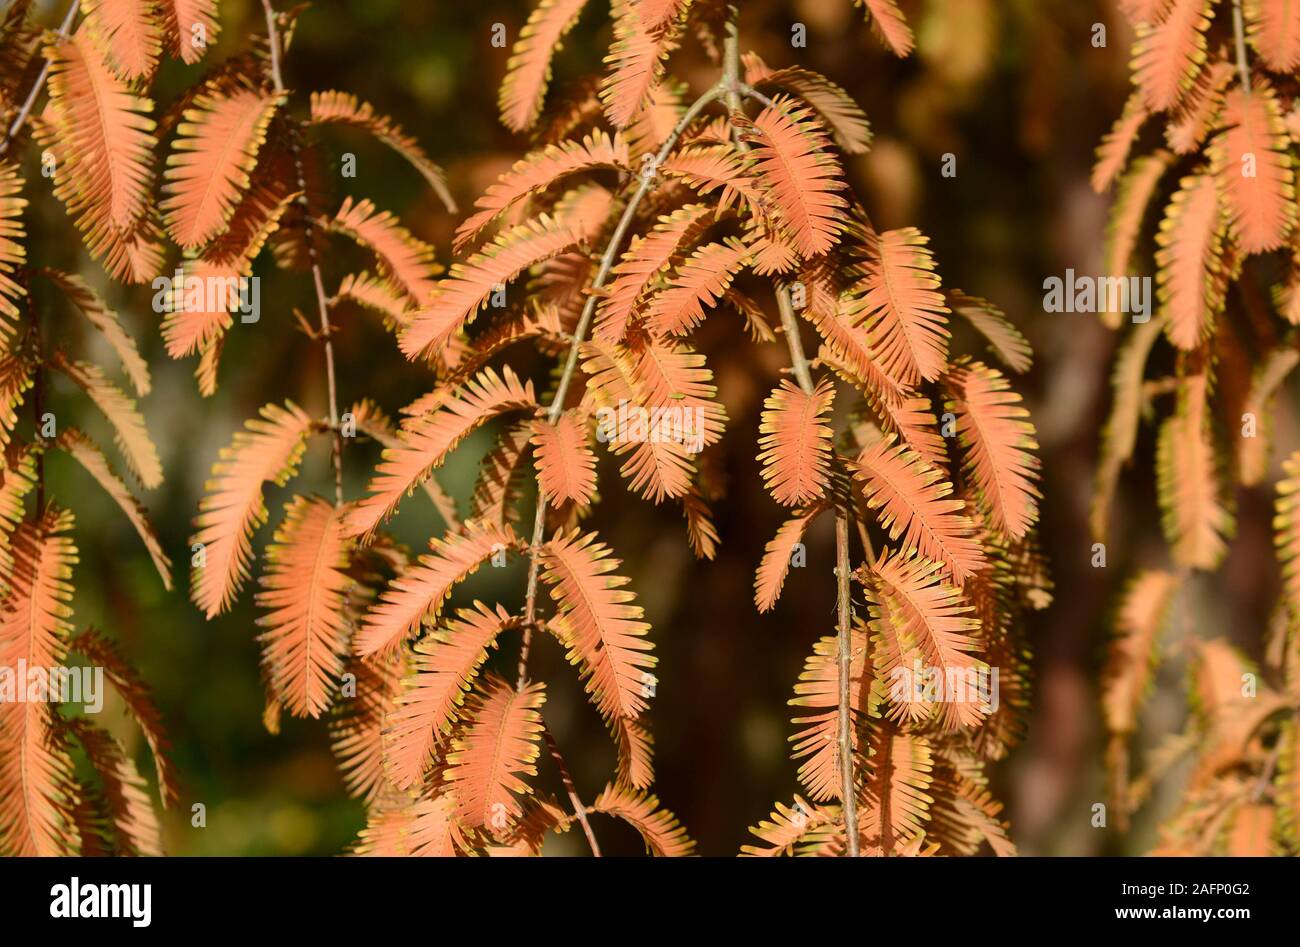 Leaves of Metasequoia glyptrostoboides, or Swamp Cypress, glow reddish brown in the late autumn sun in the botanic garden in Oxford, UK Stock Photo